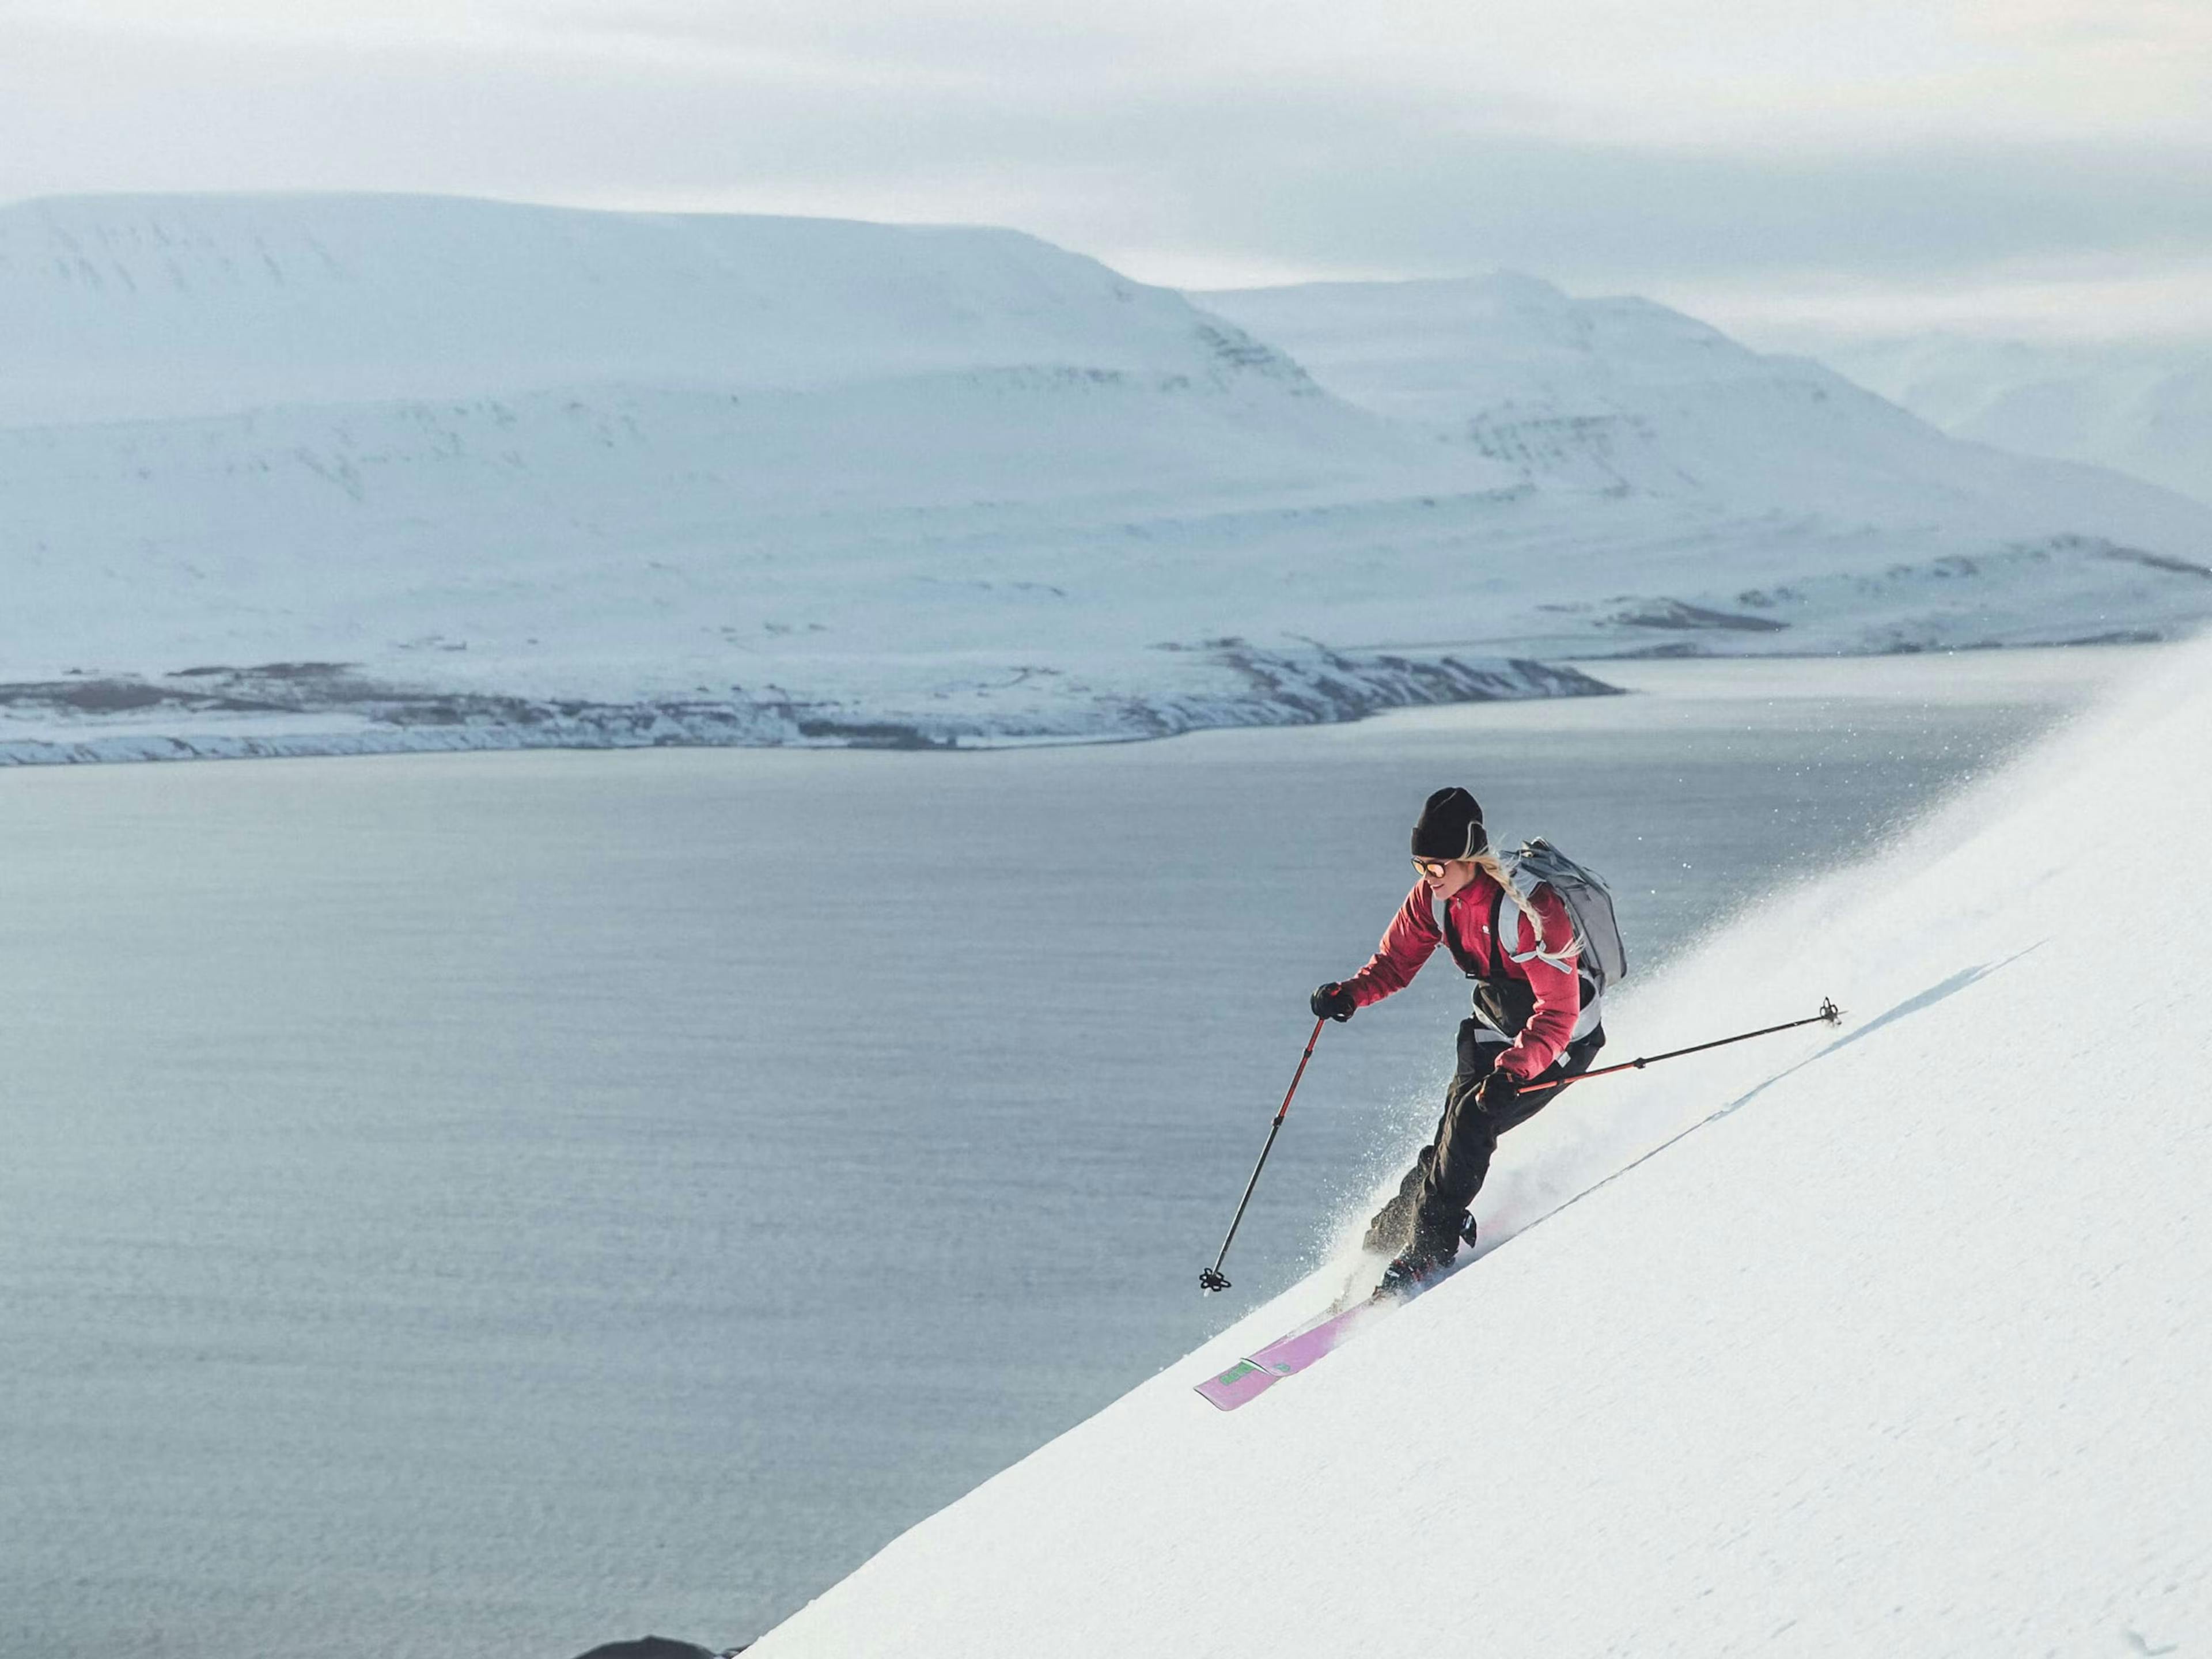 Girl skiing in iceland with ocean and snowed mountains in the background